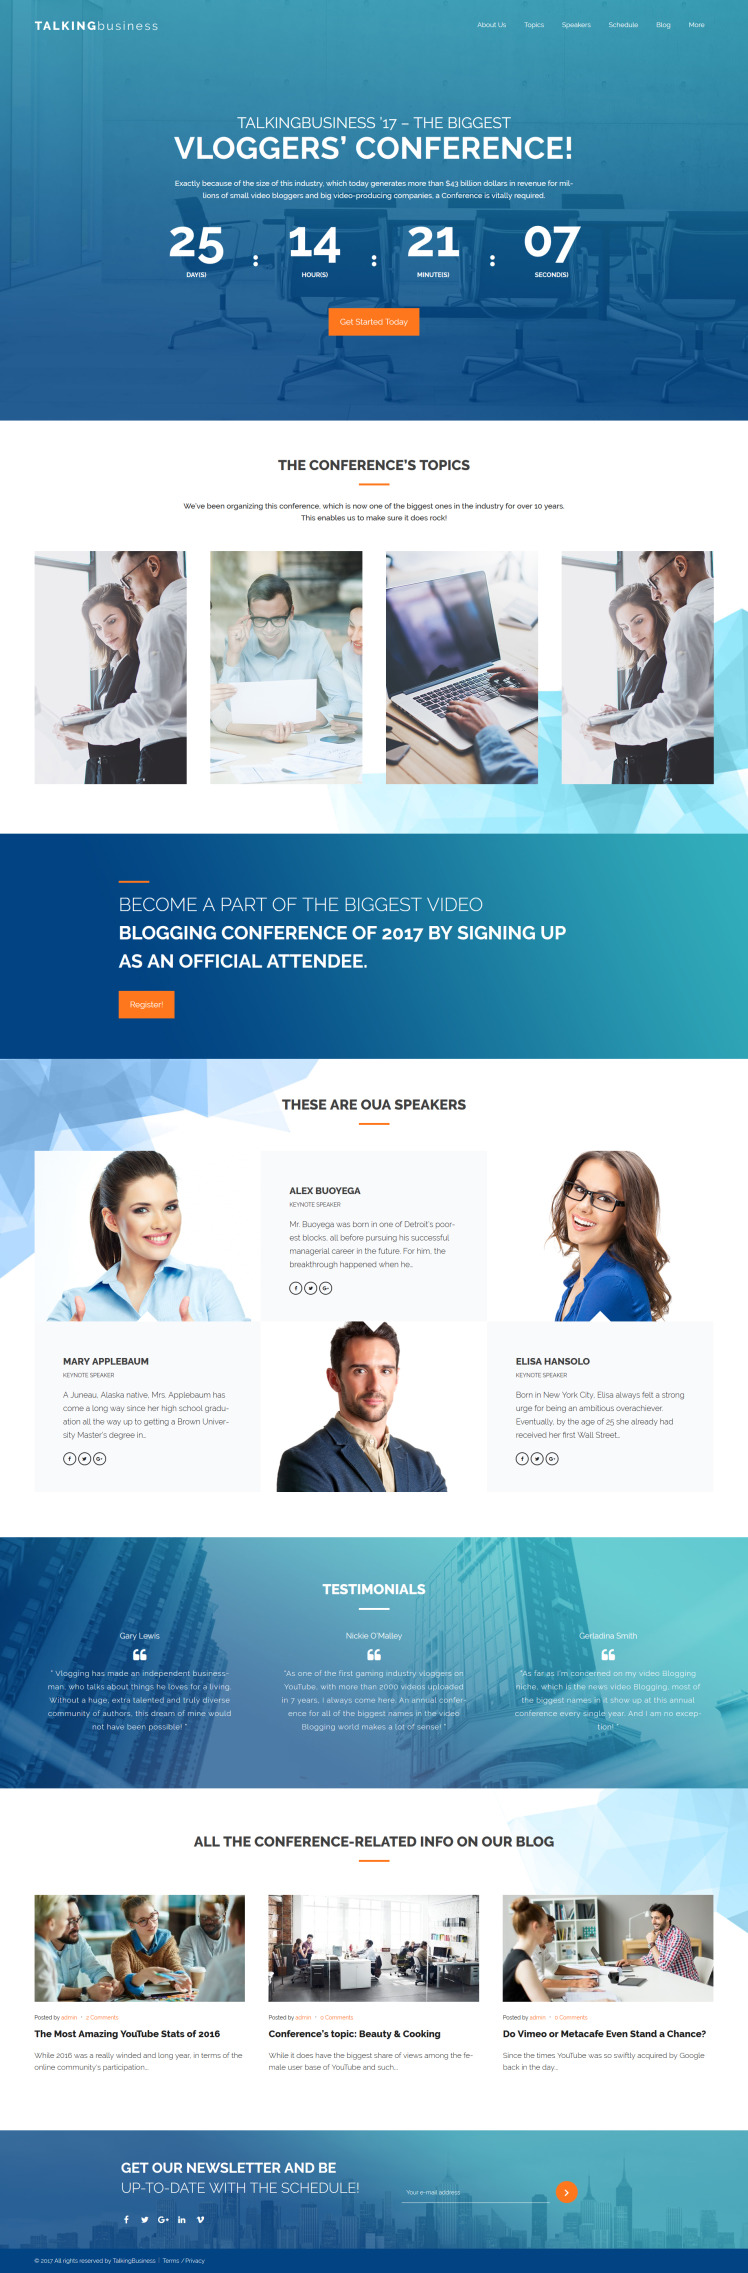 Talking Business Business Coaching Consulting WordPress Theme